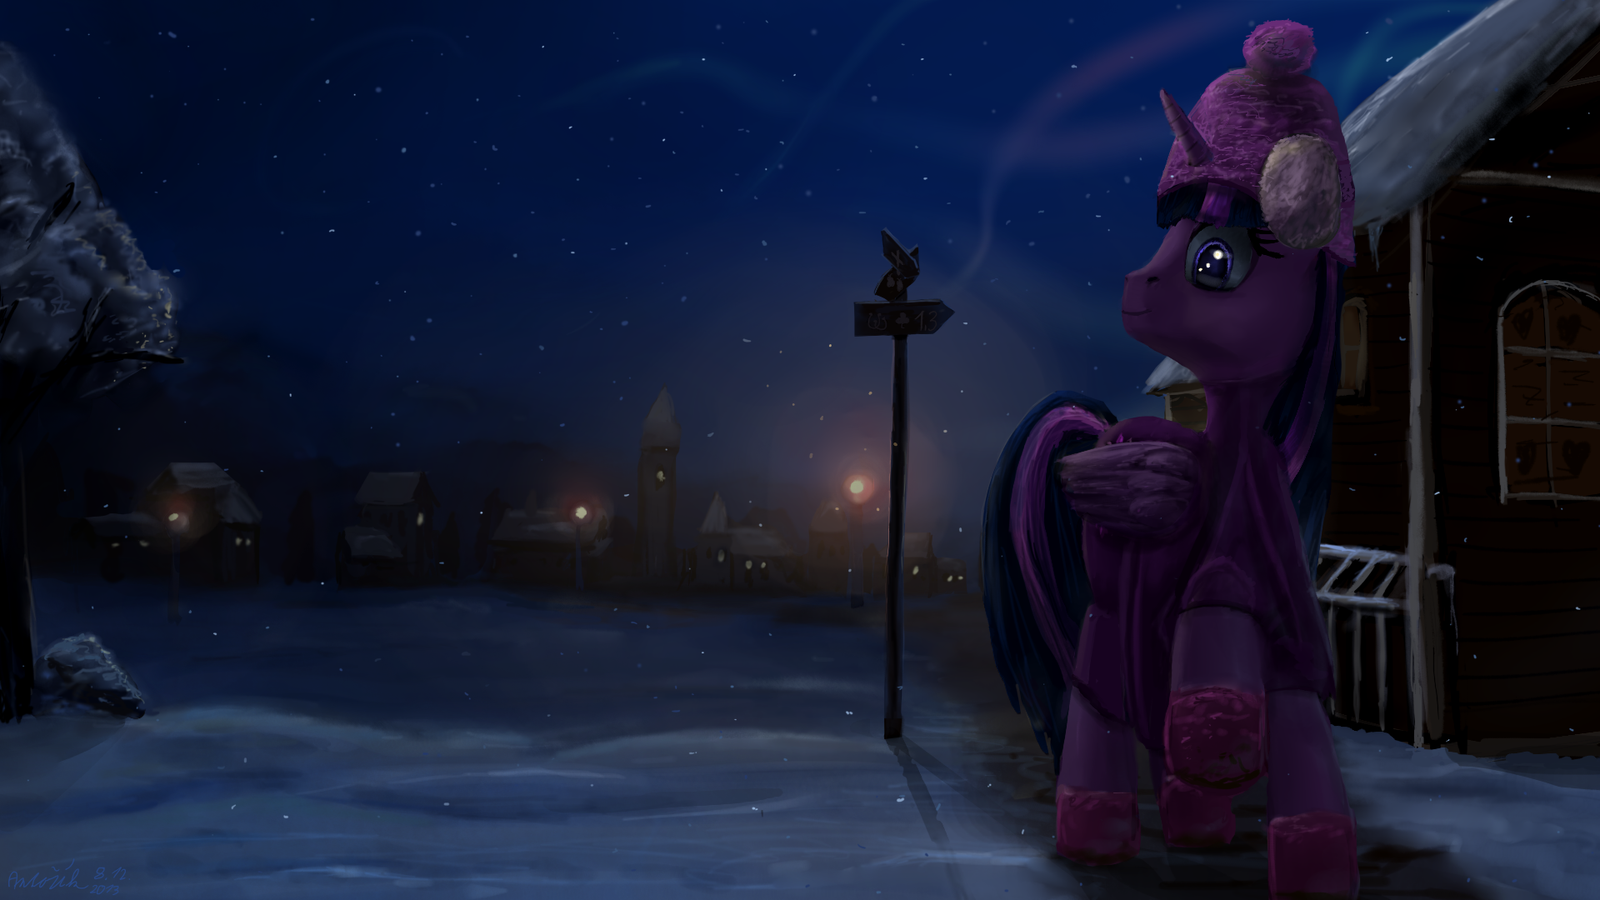 [Obrázek: twilight_ain_t_cold_no_more_by_anttosik-d6x5znp.png]